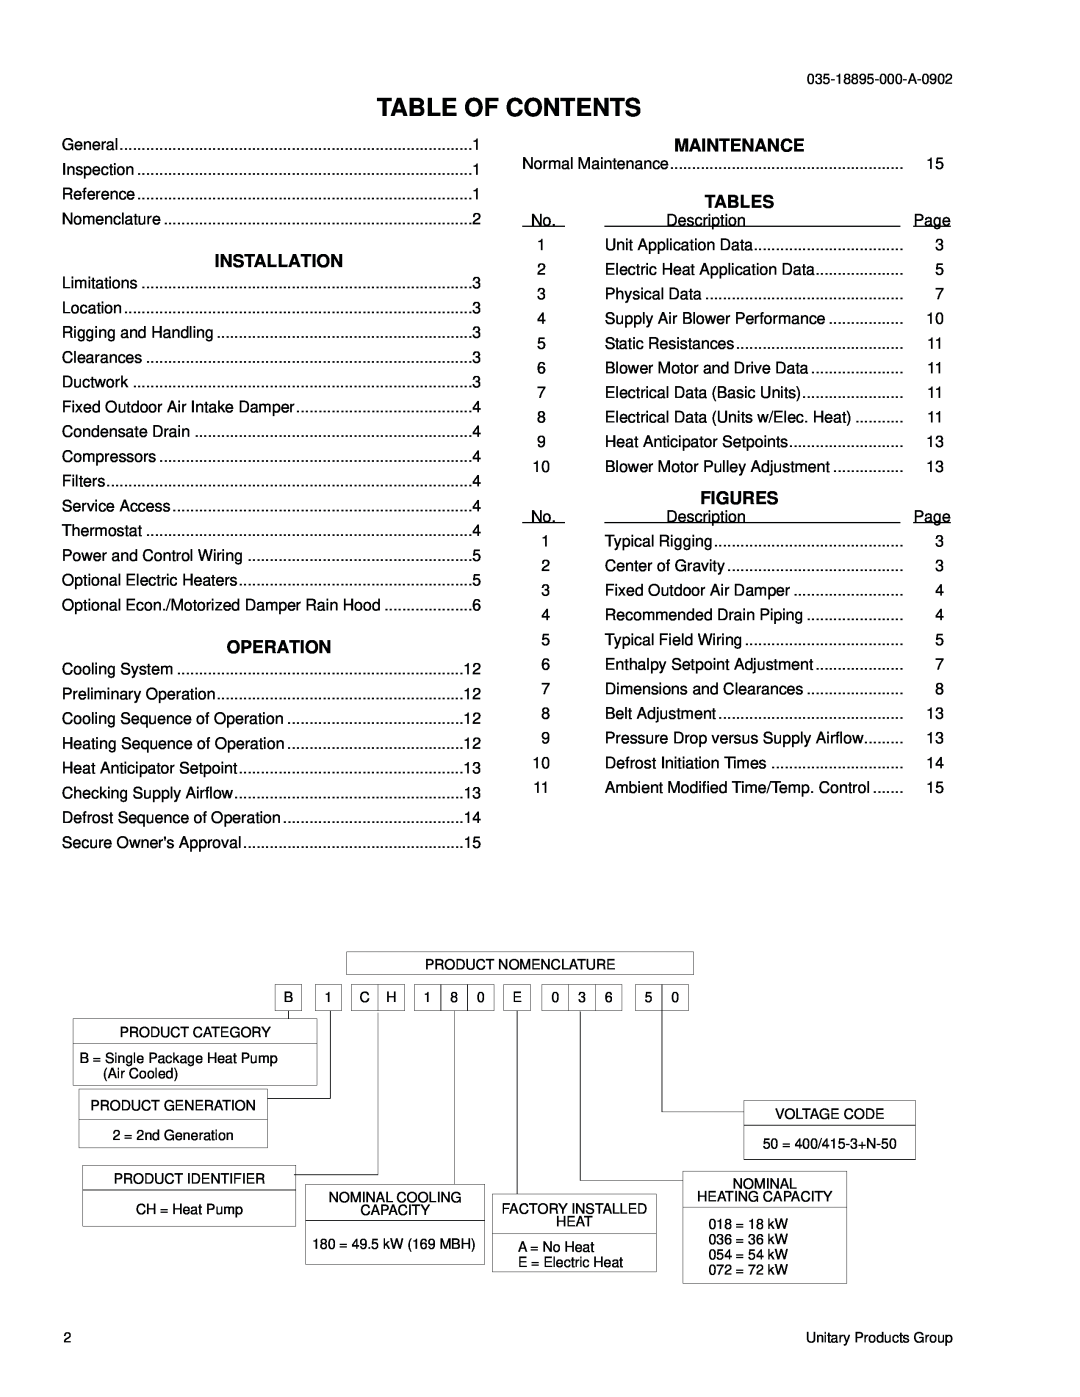 York B2CH180 installation instructions Table Of Contents, Installation, Operation, Maintenance, Tables, Figures 